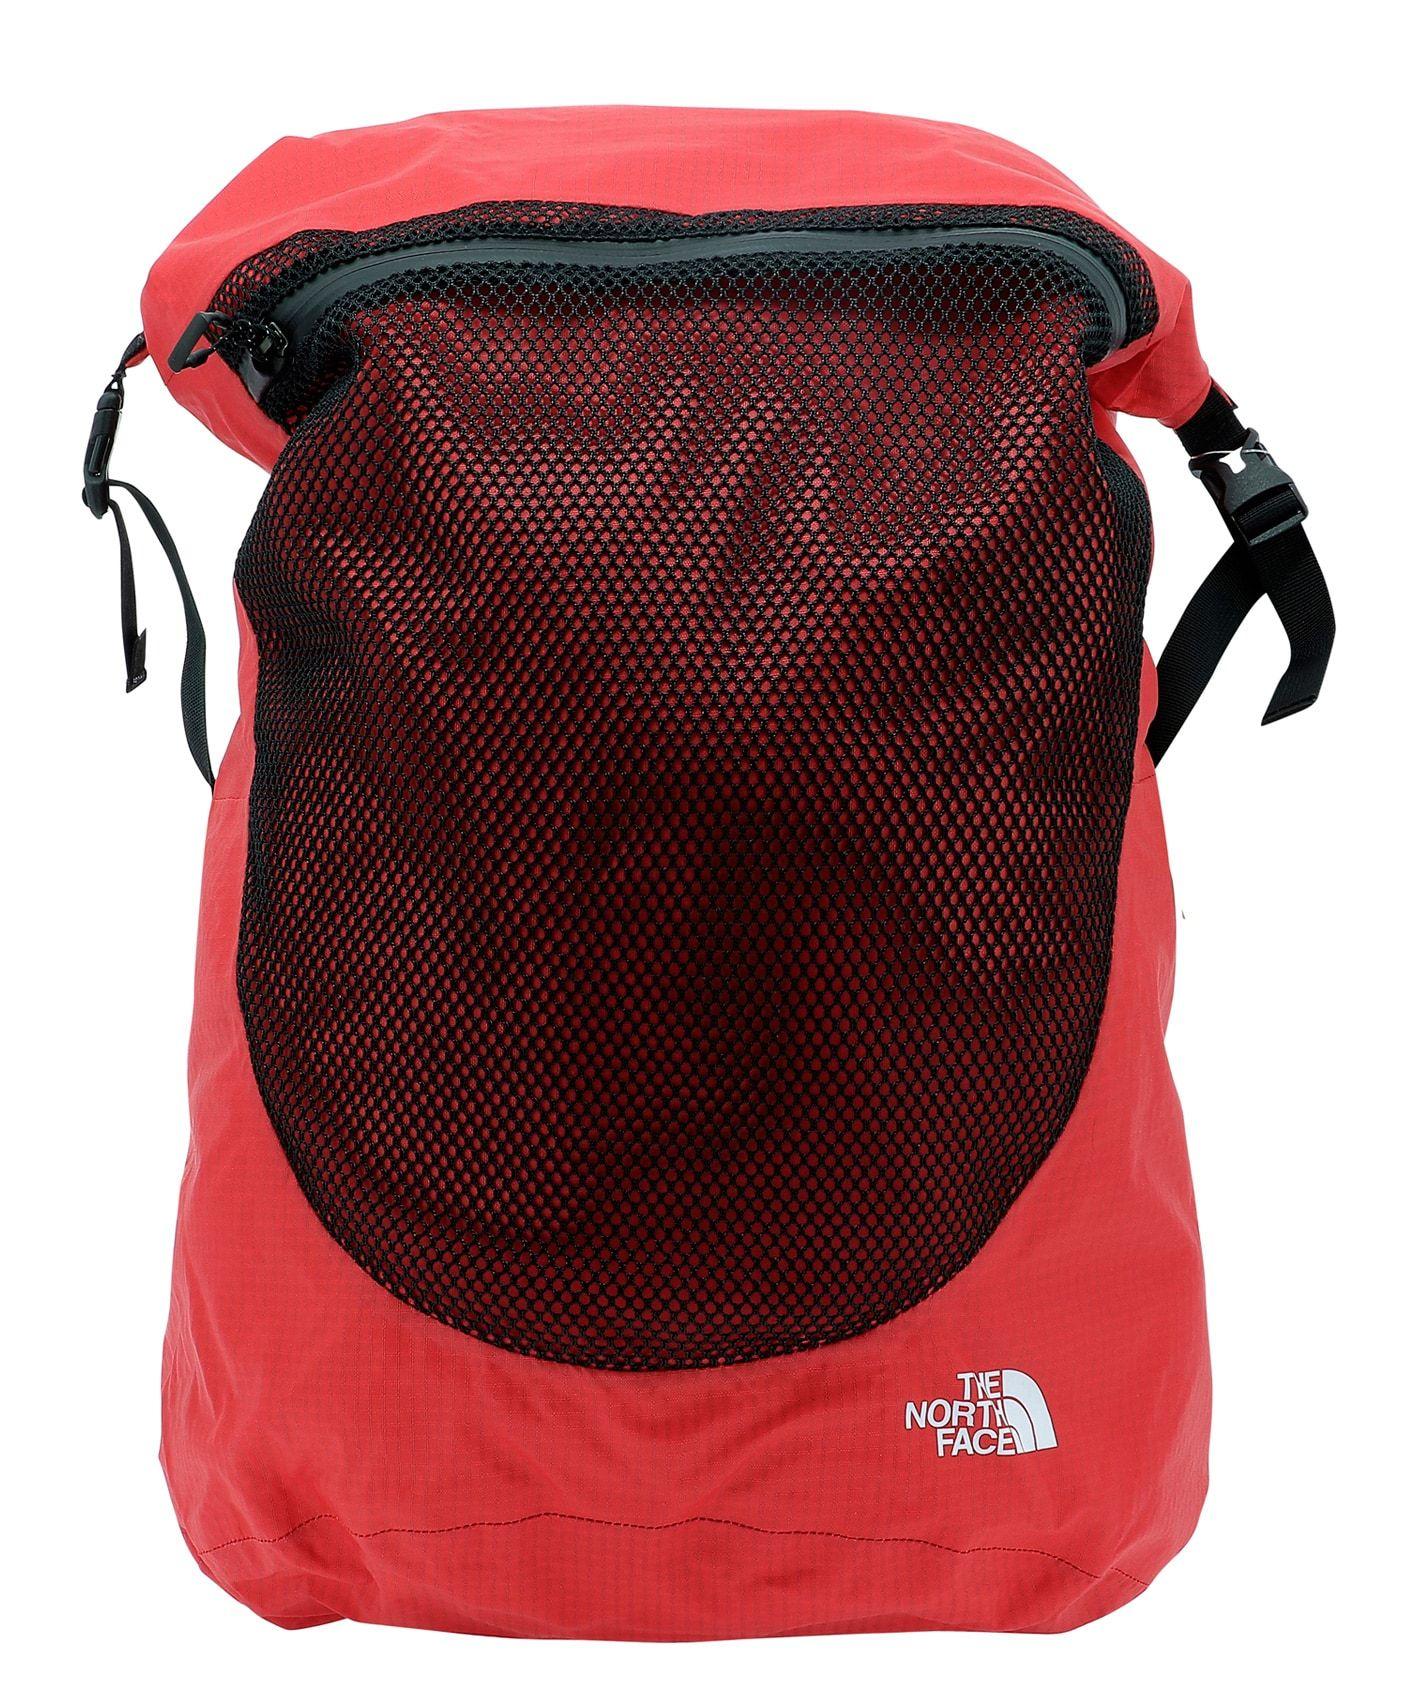 The North Face Synthetic Waterproof Rolltop Backpack in Red for Men - Lyst